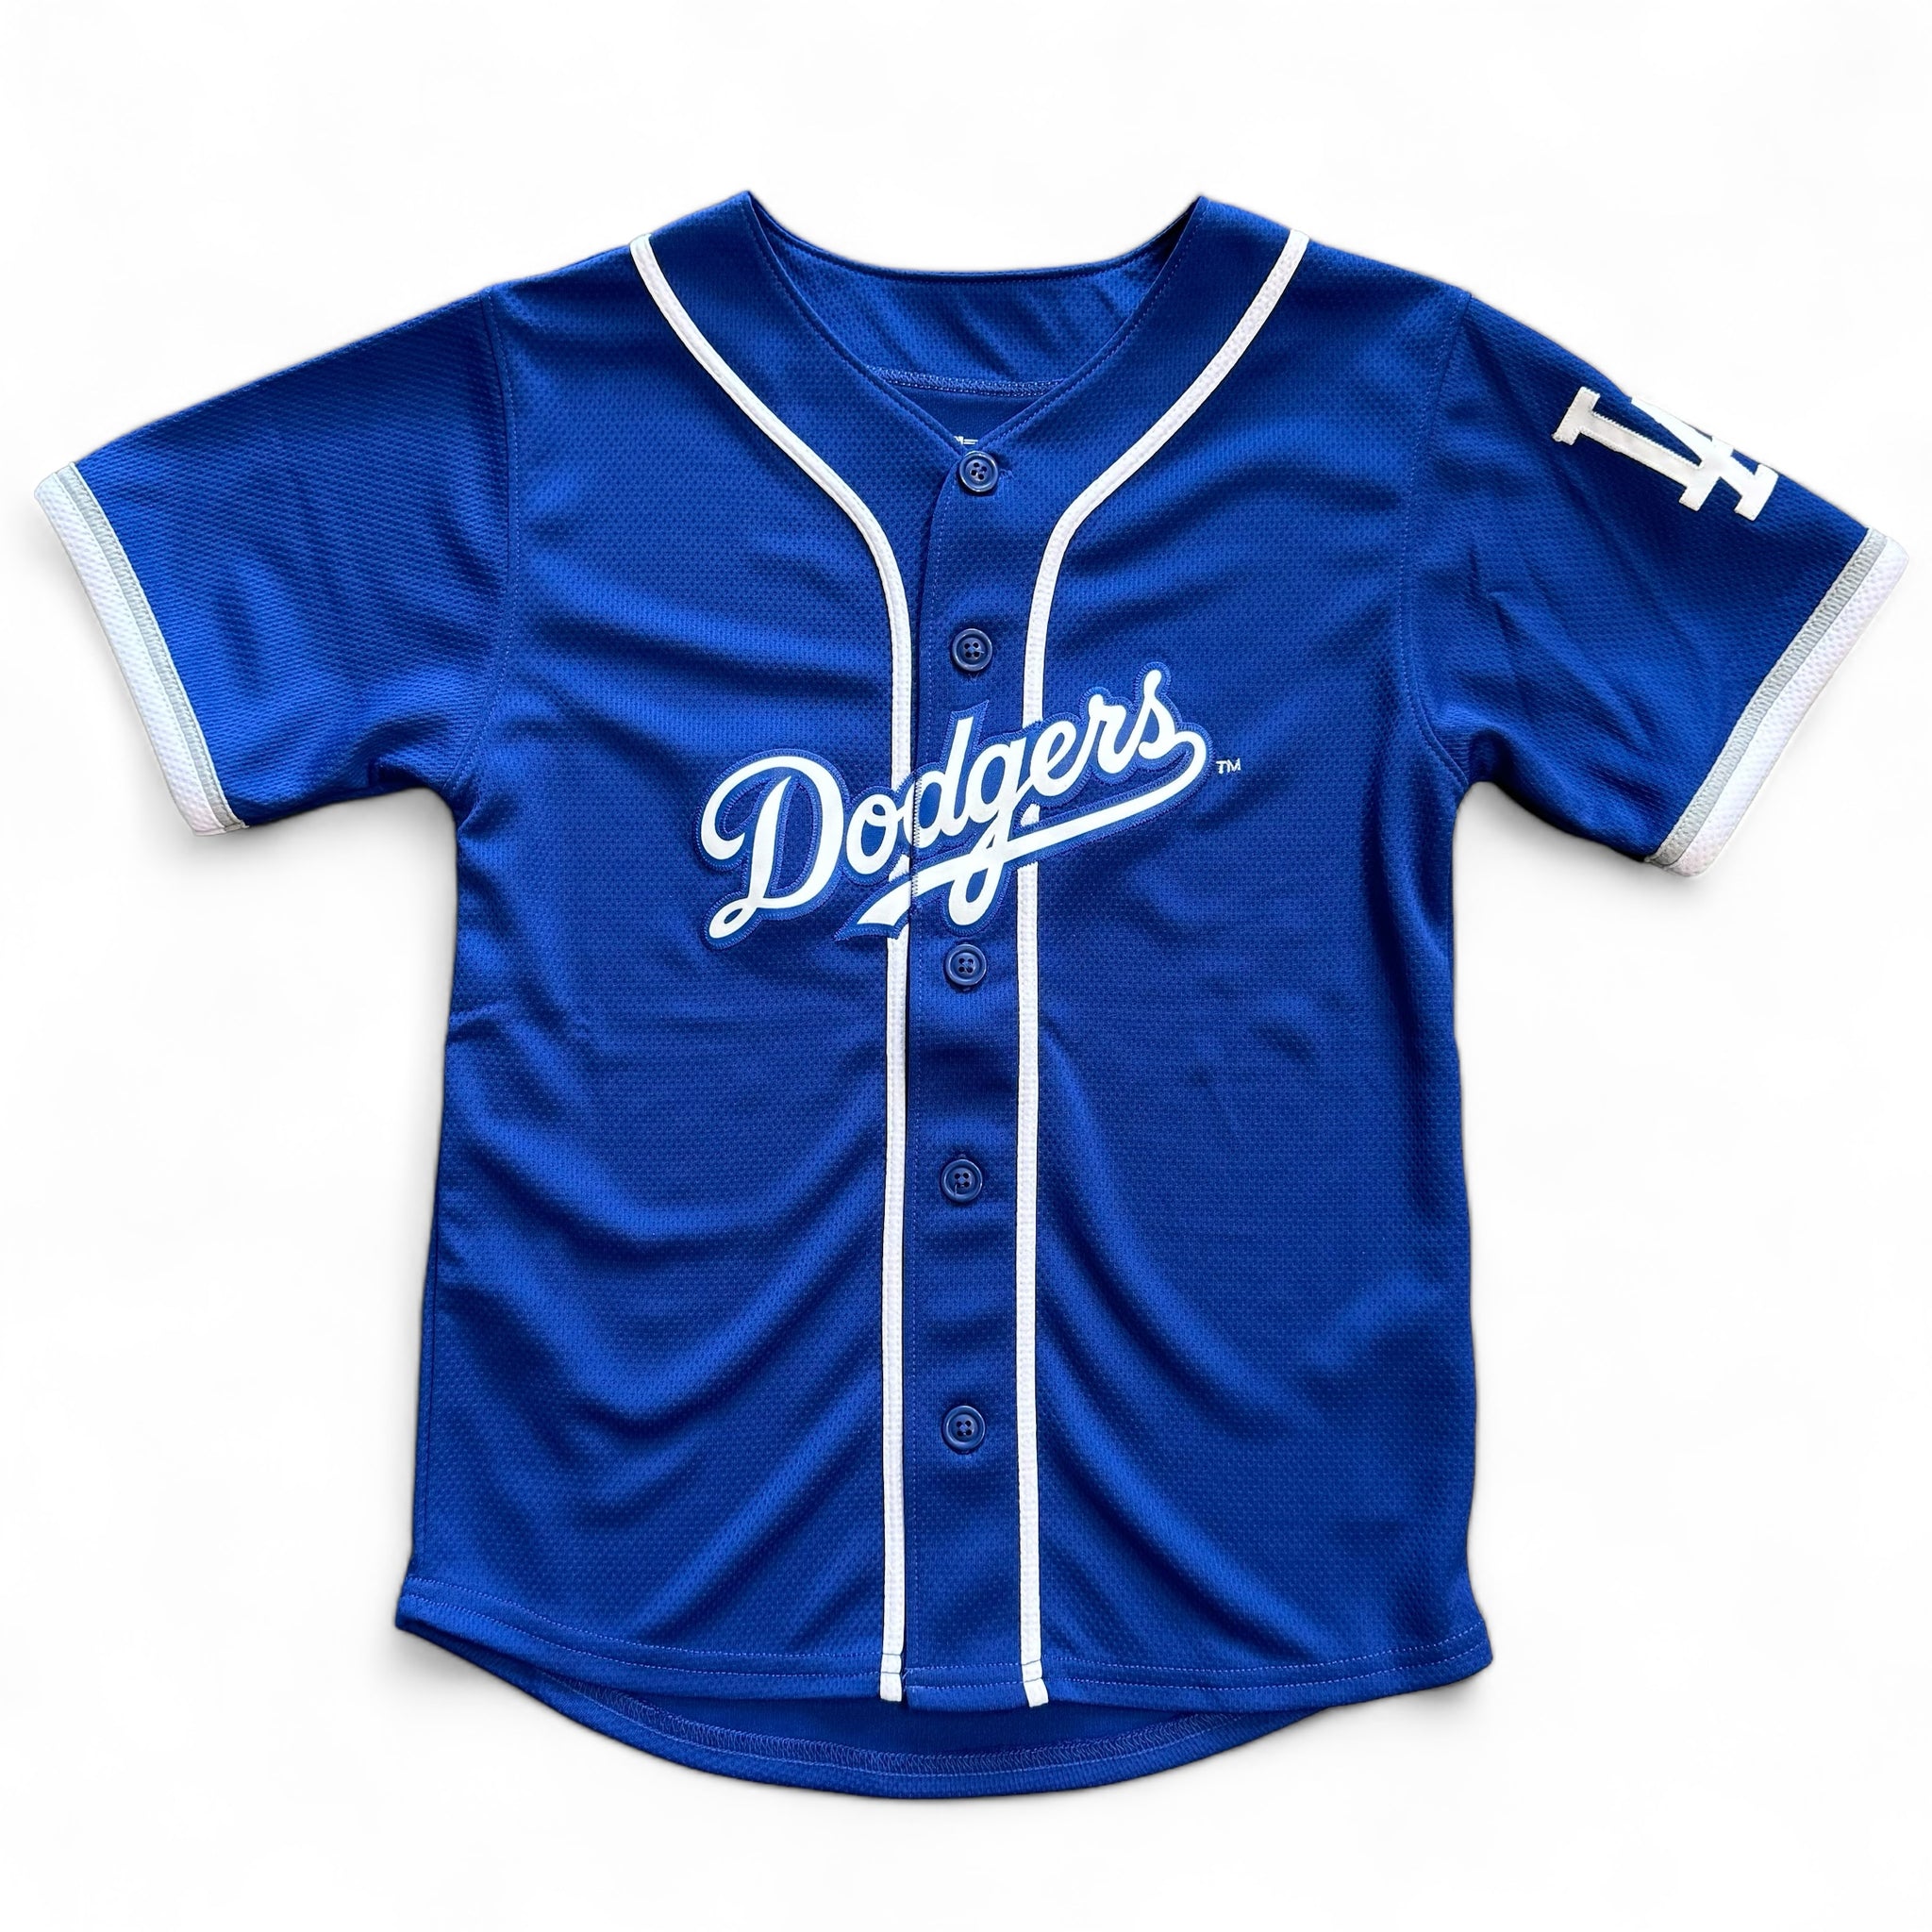 Los Angeles Dodgers Youth Fashion Jersey - Blue